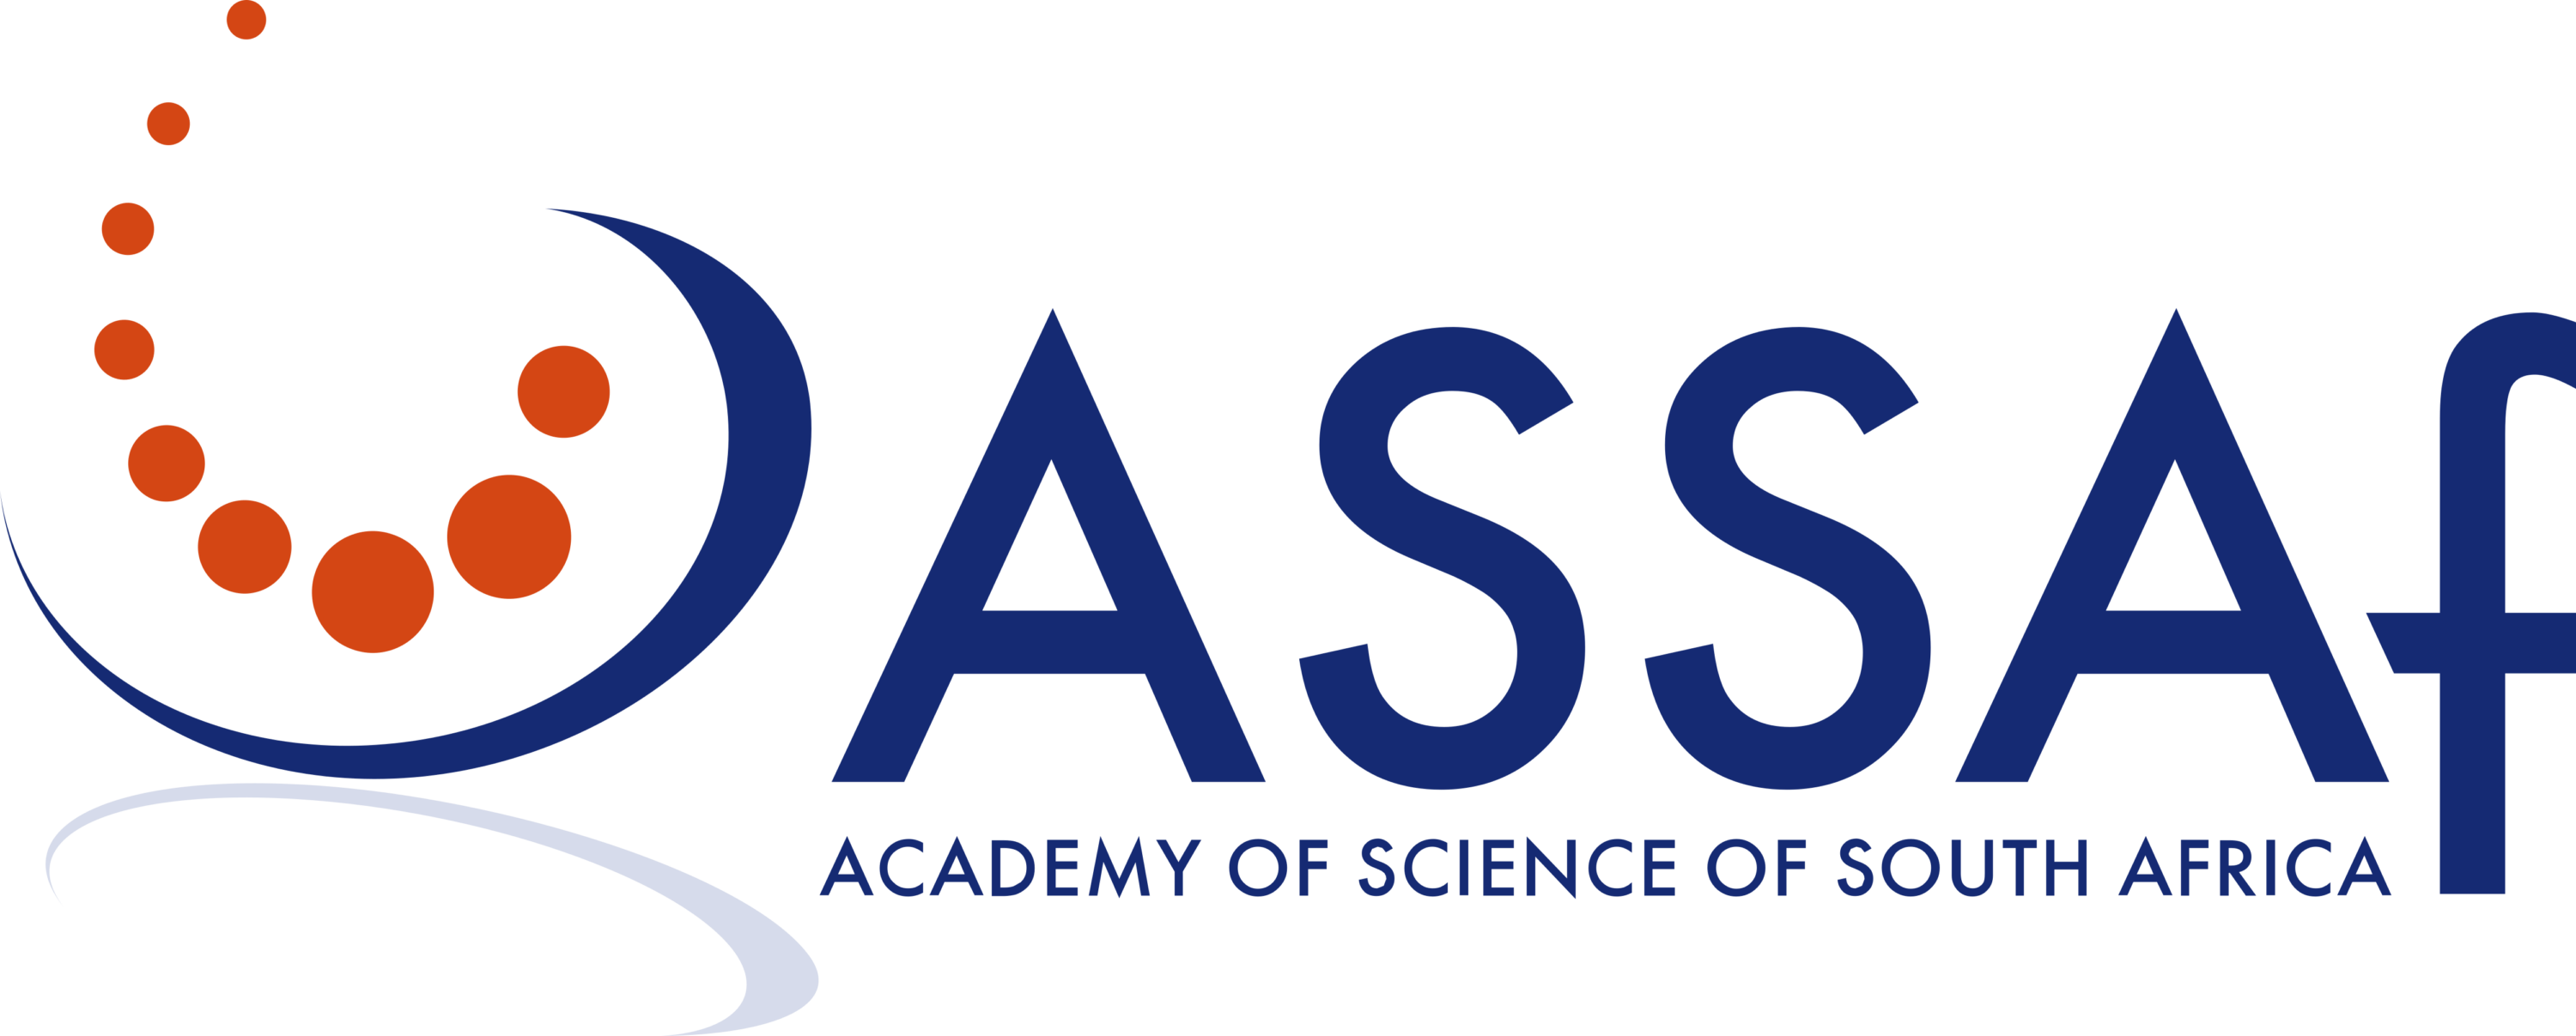 Academy of Science of South Africa Logo